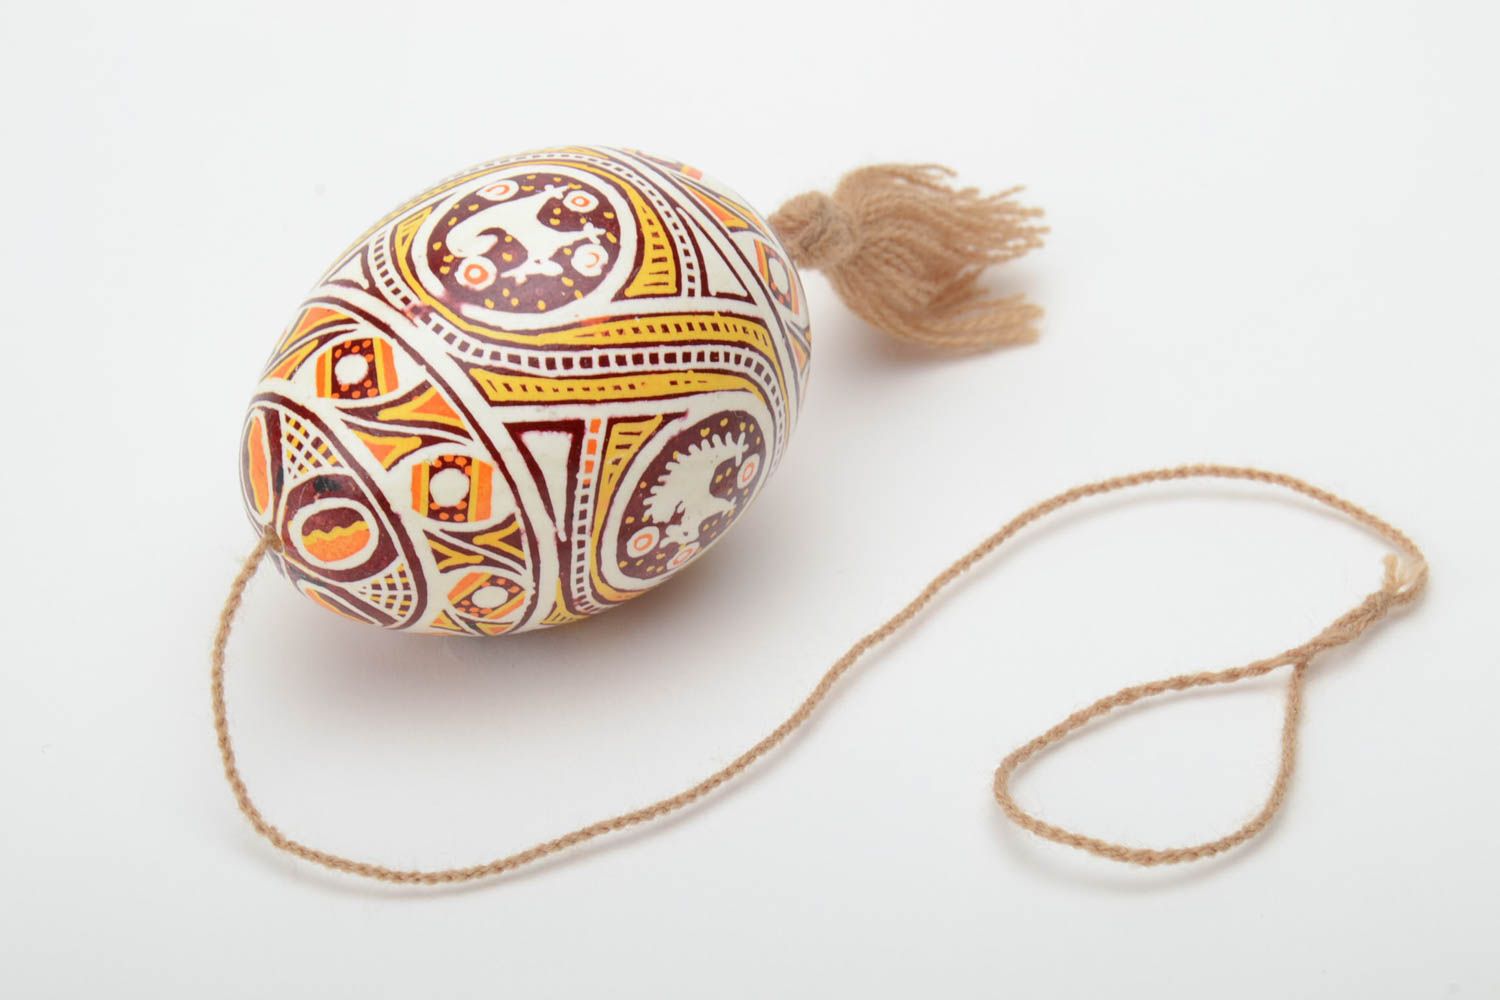 Homemade painted Easter egg with tassel and patterns created using waxing technique photo 2